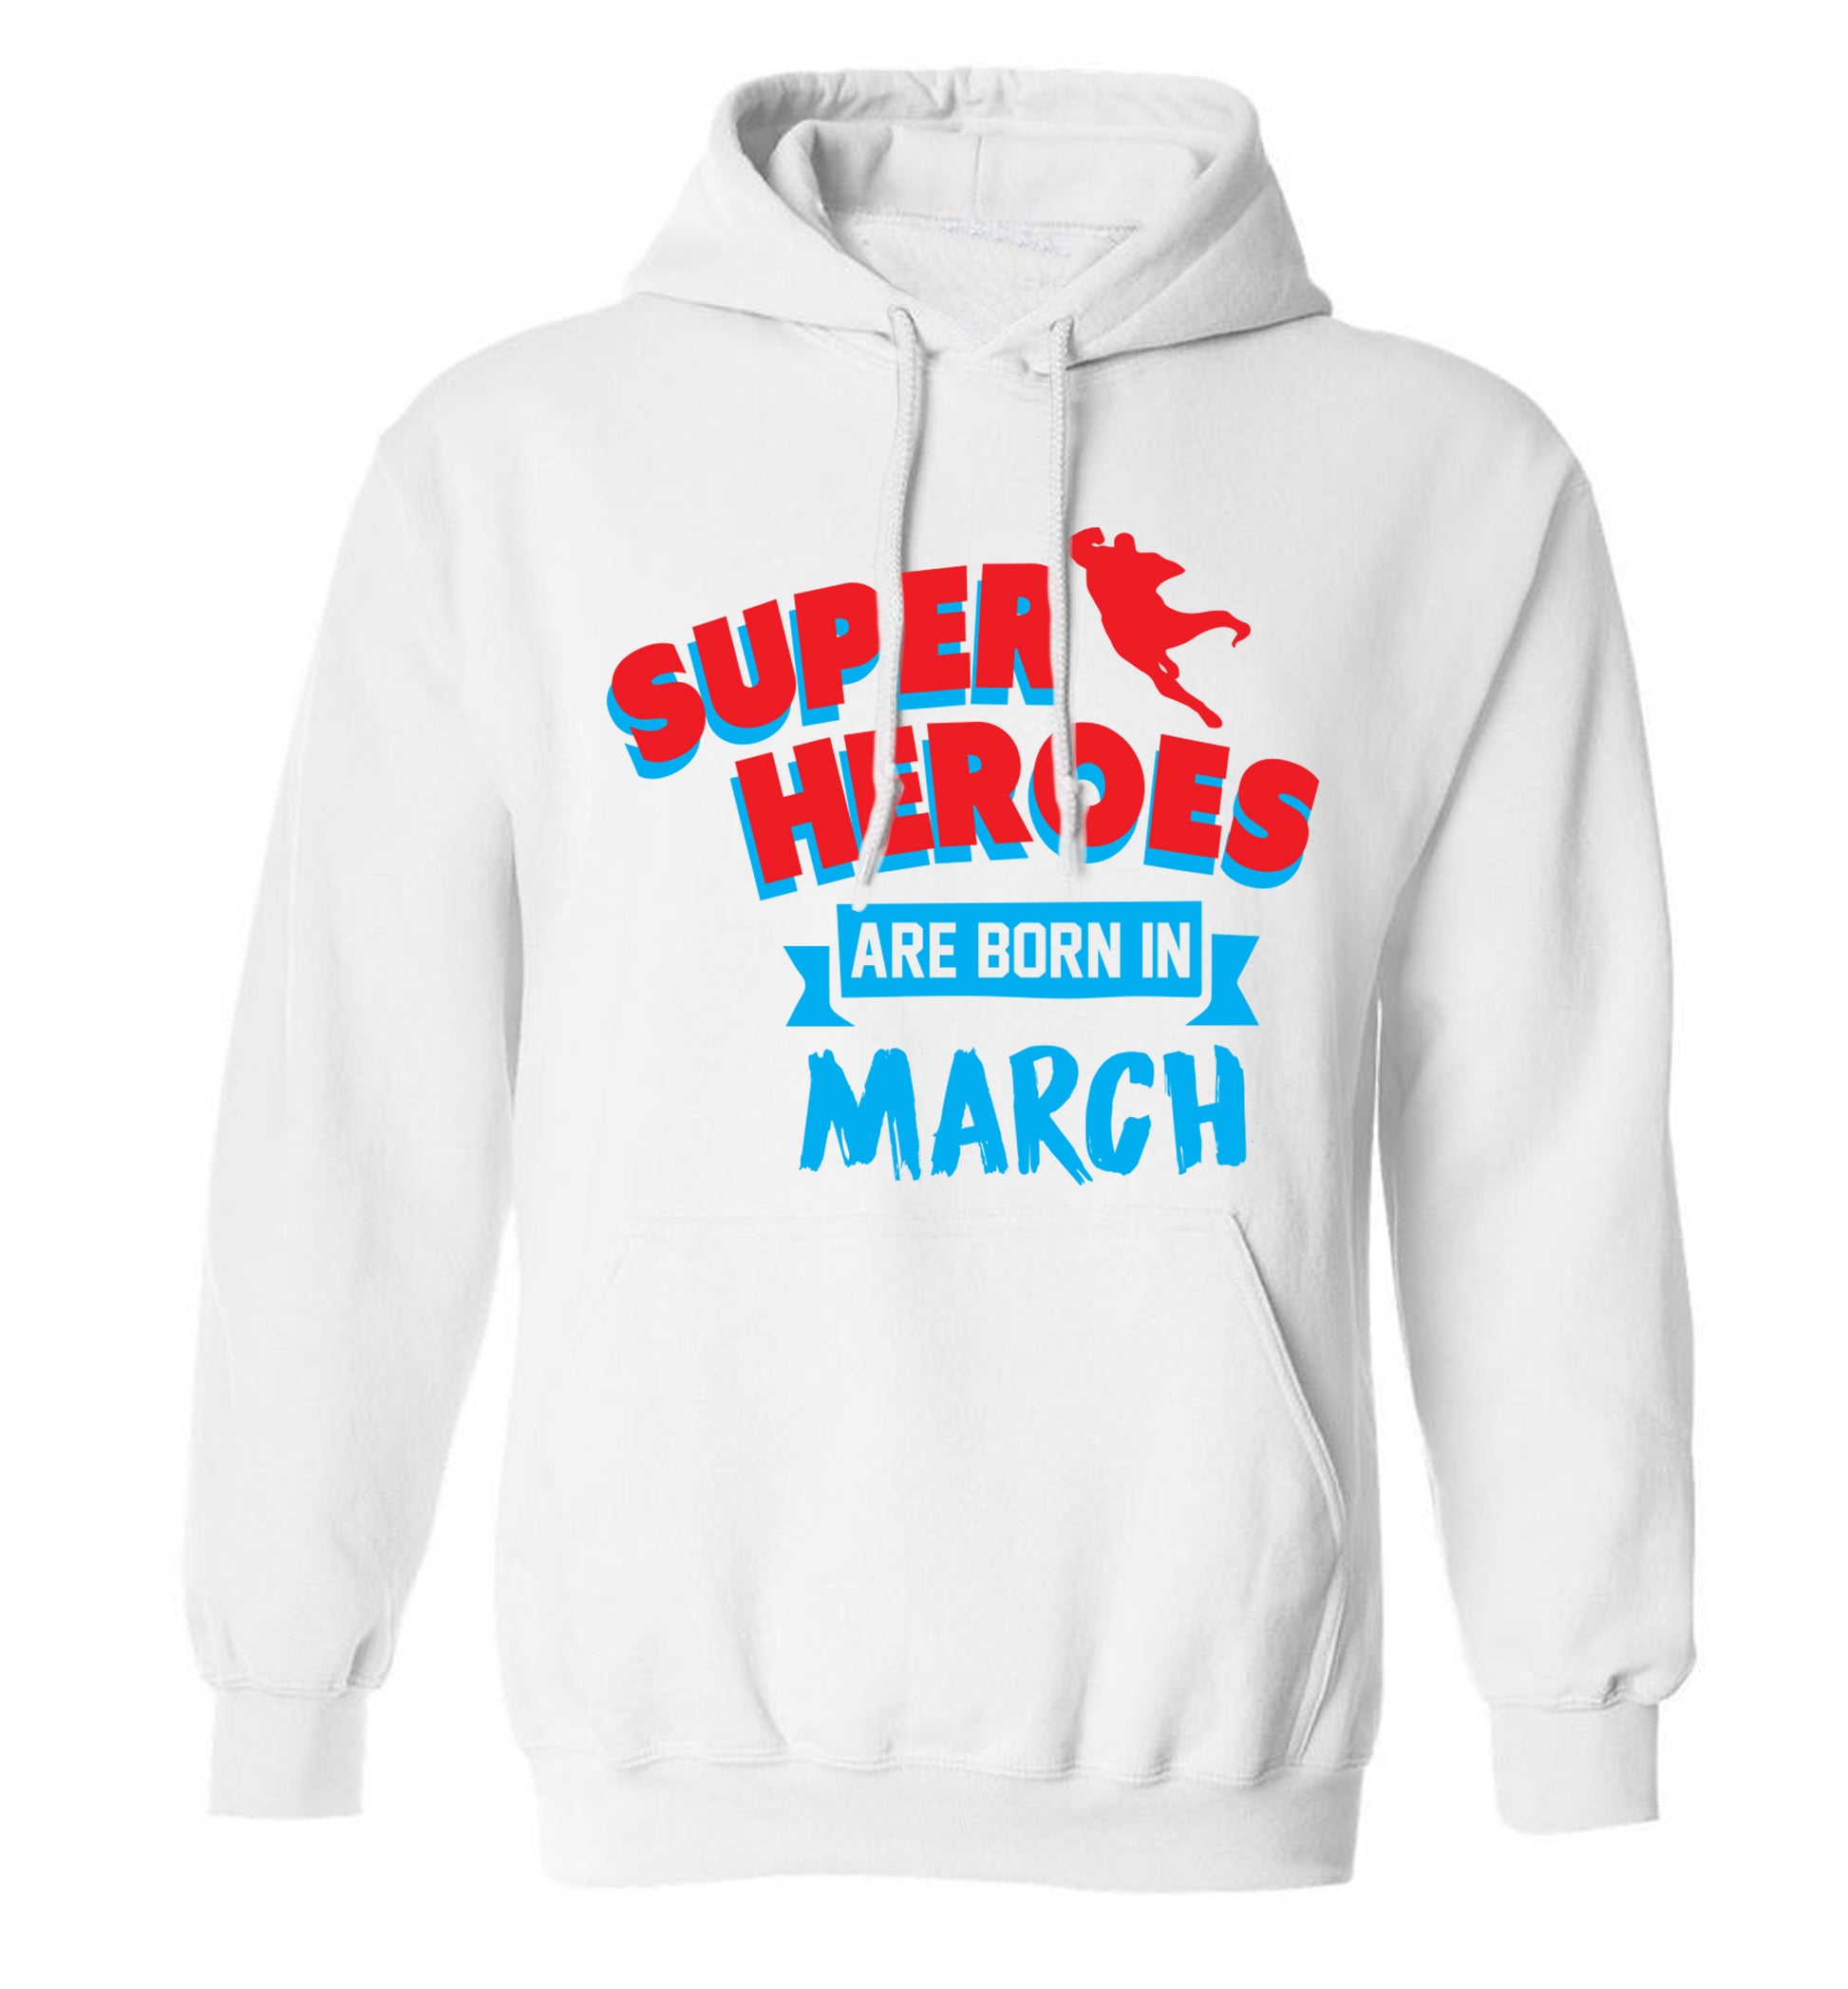 Superheros are born in March adults unisex white hoodie 2XL